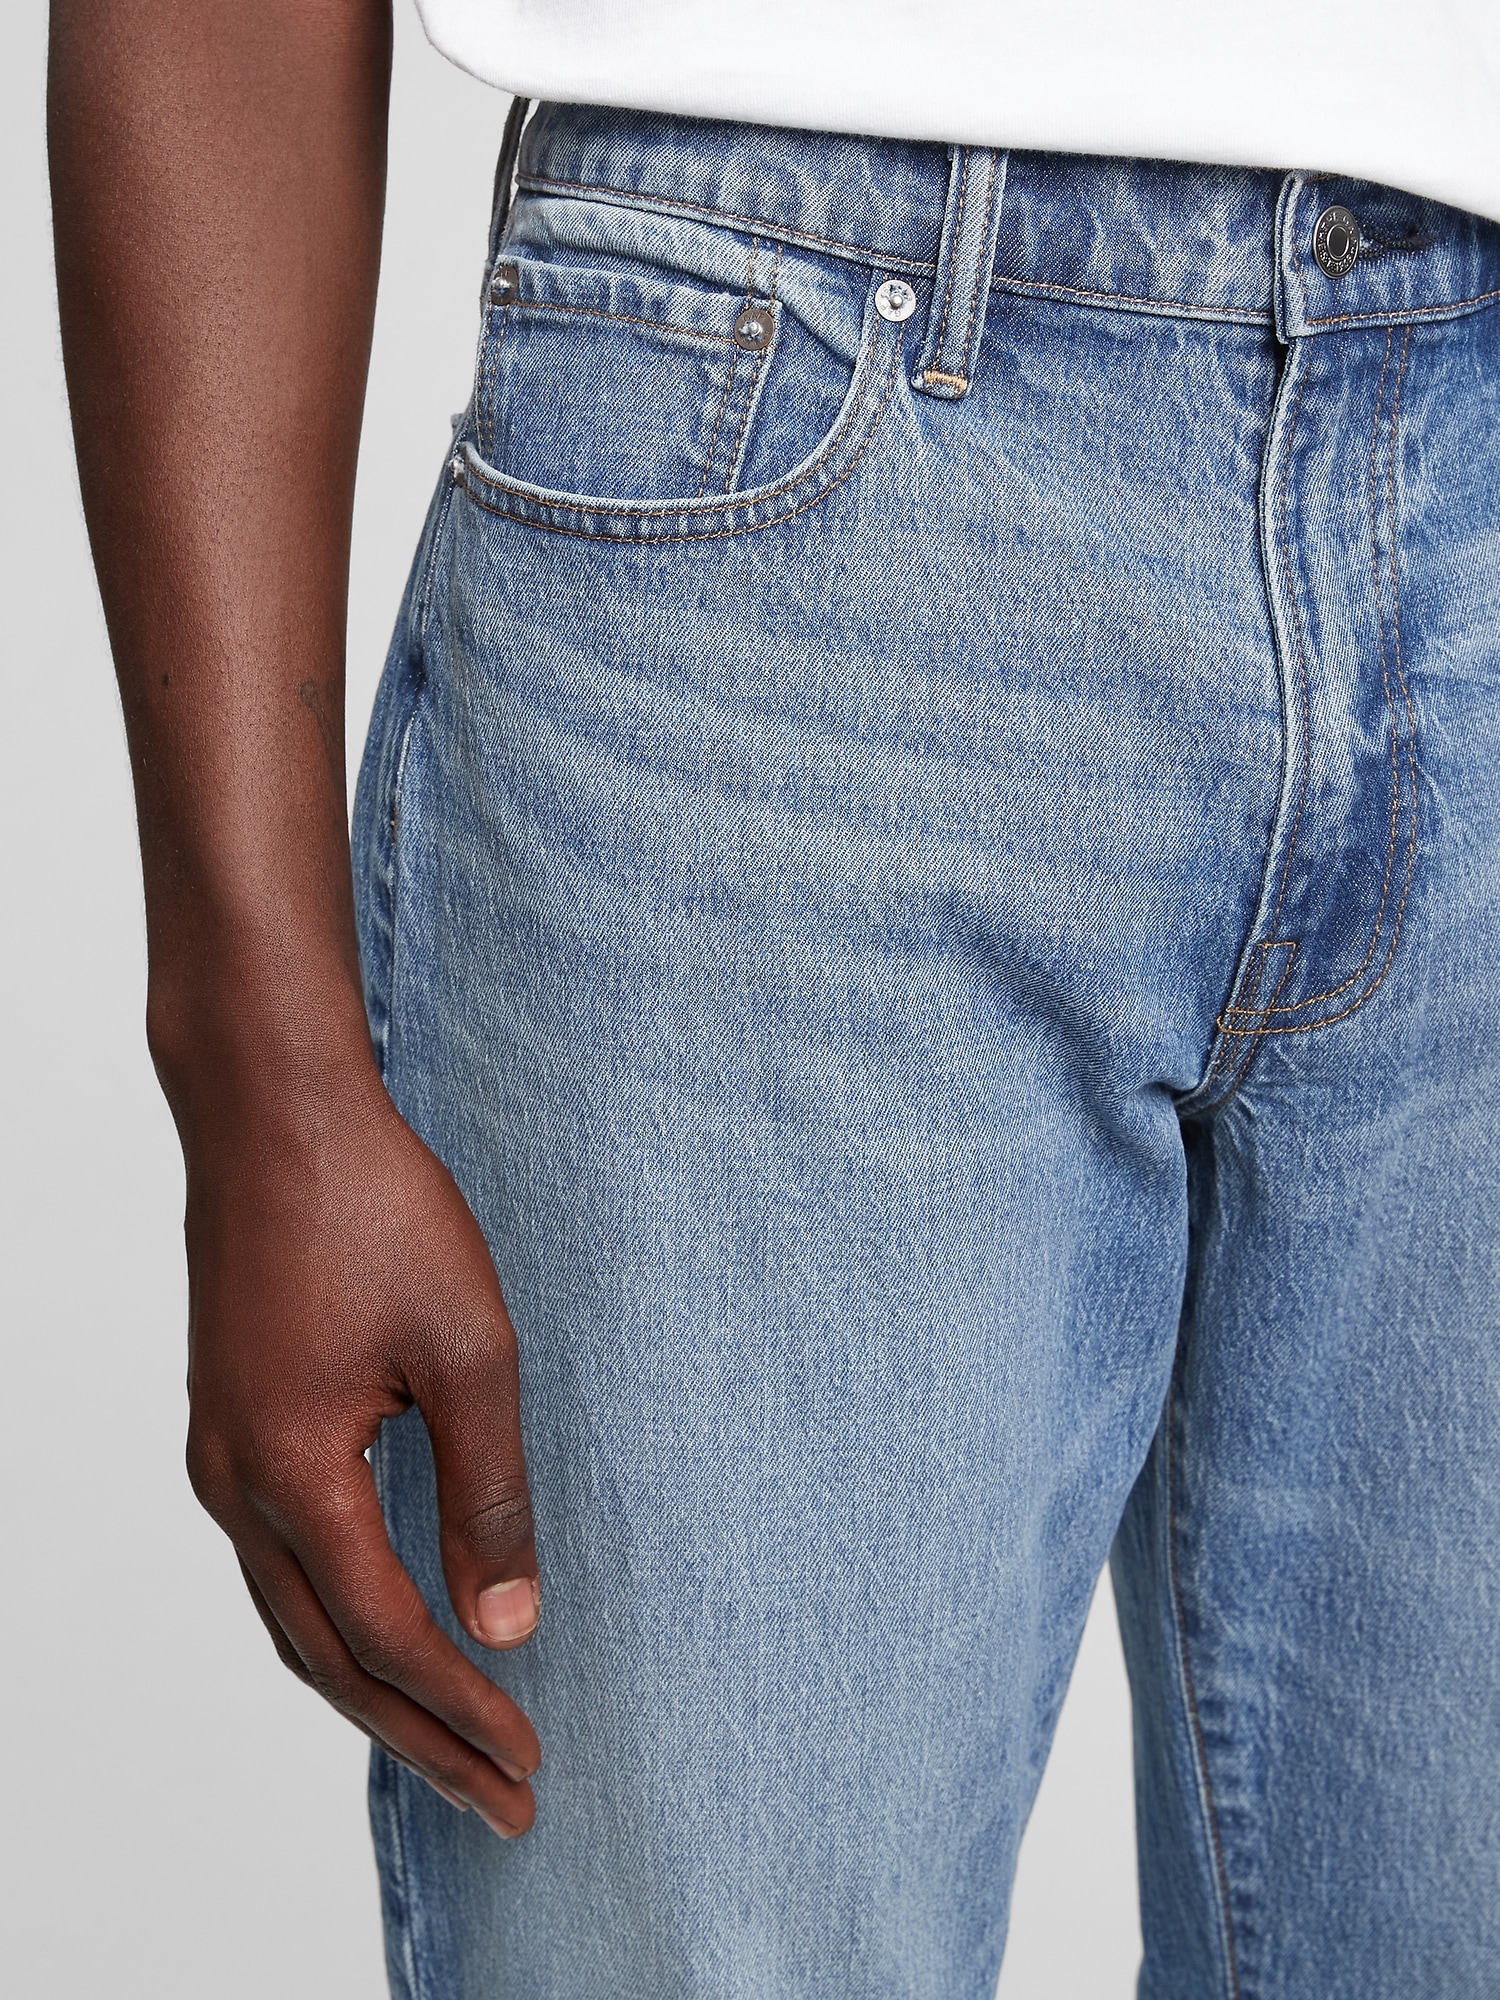 NEW - GAP Men's Standard Jeans With Washwell Indigo Resin Rinse Wash 33x32  - $59 